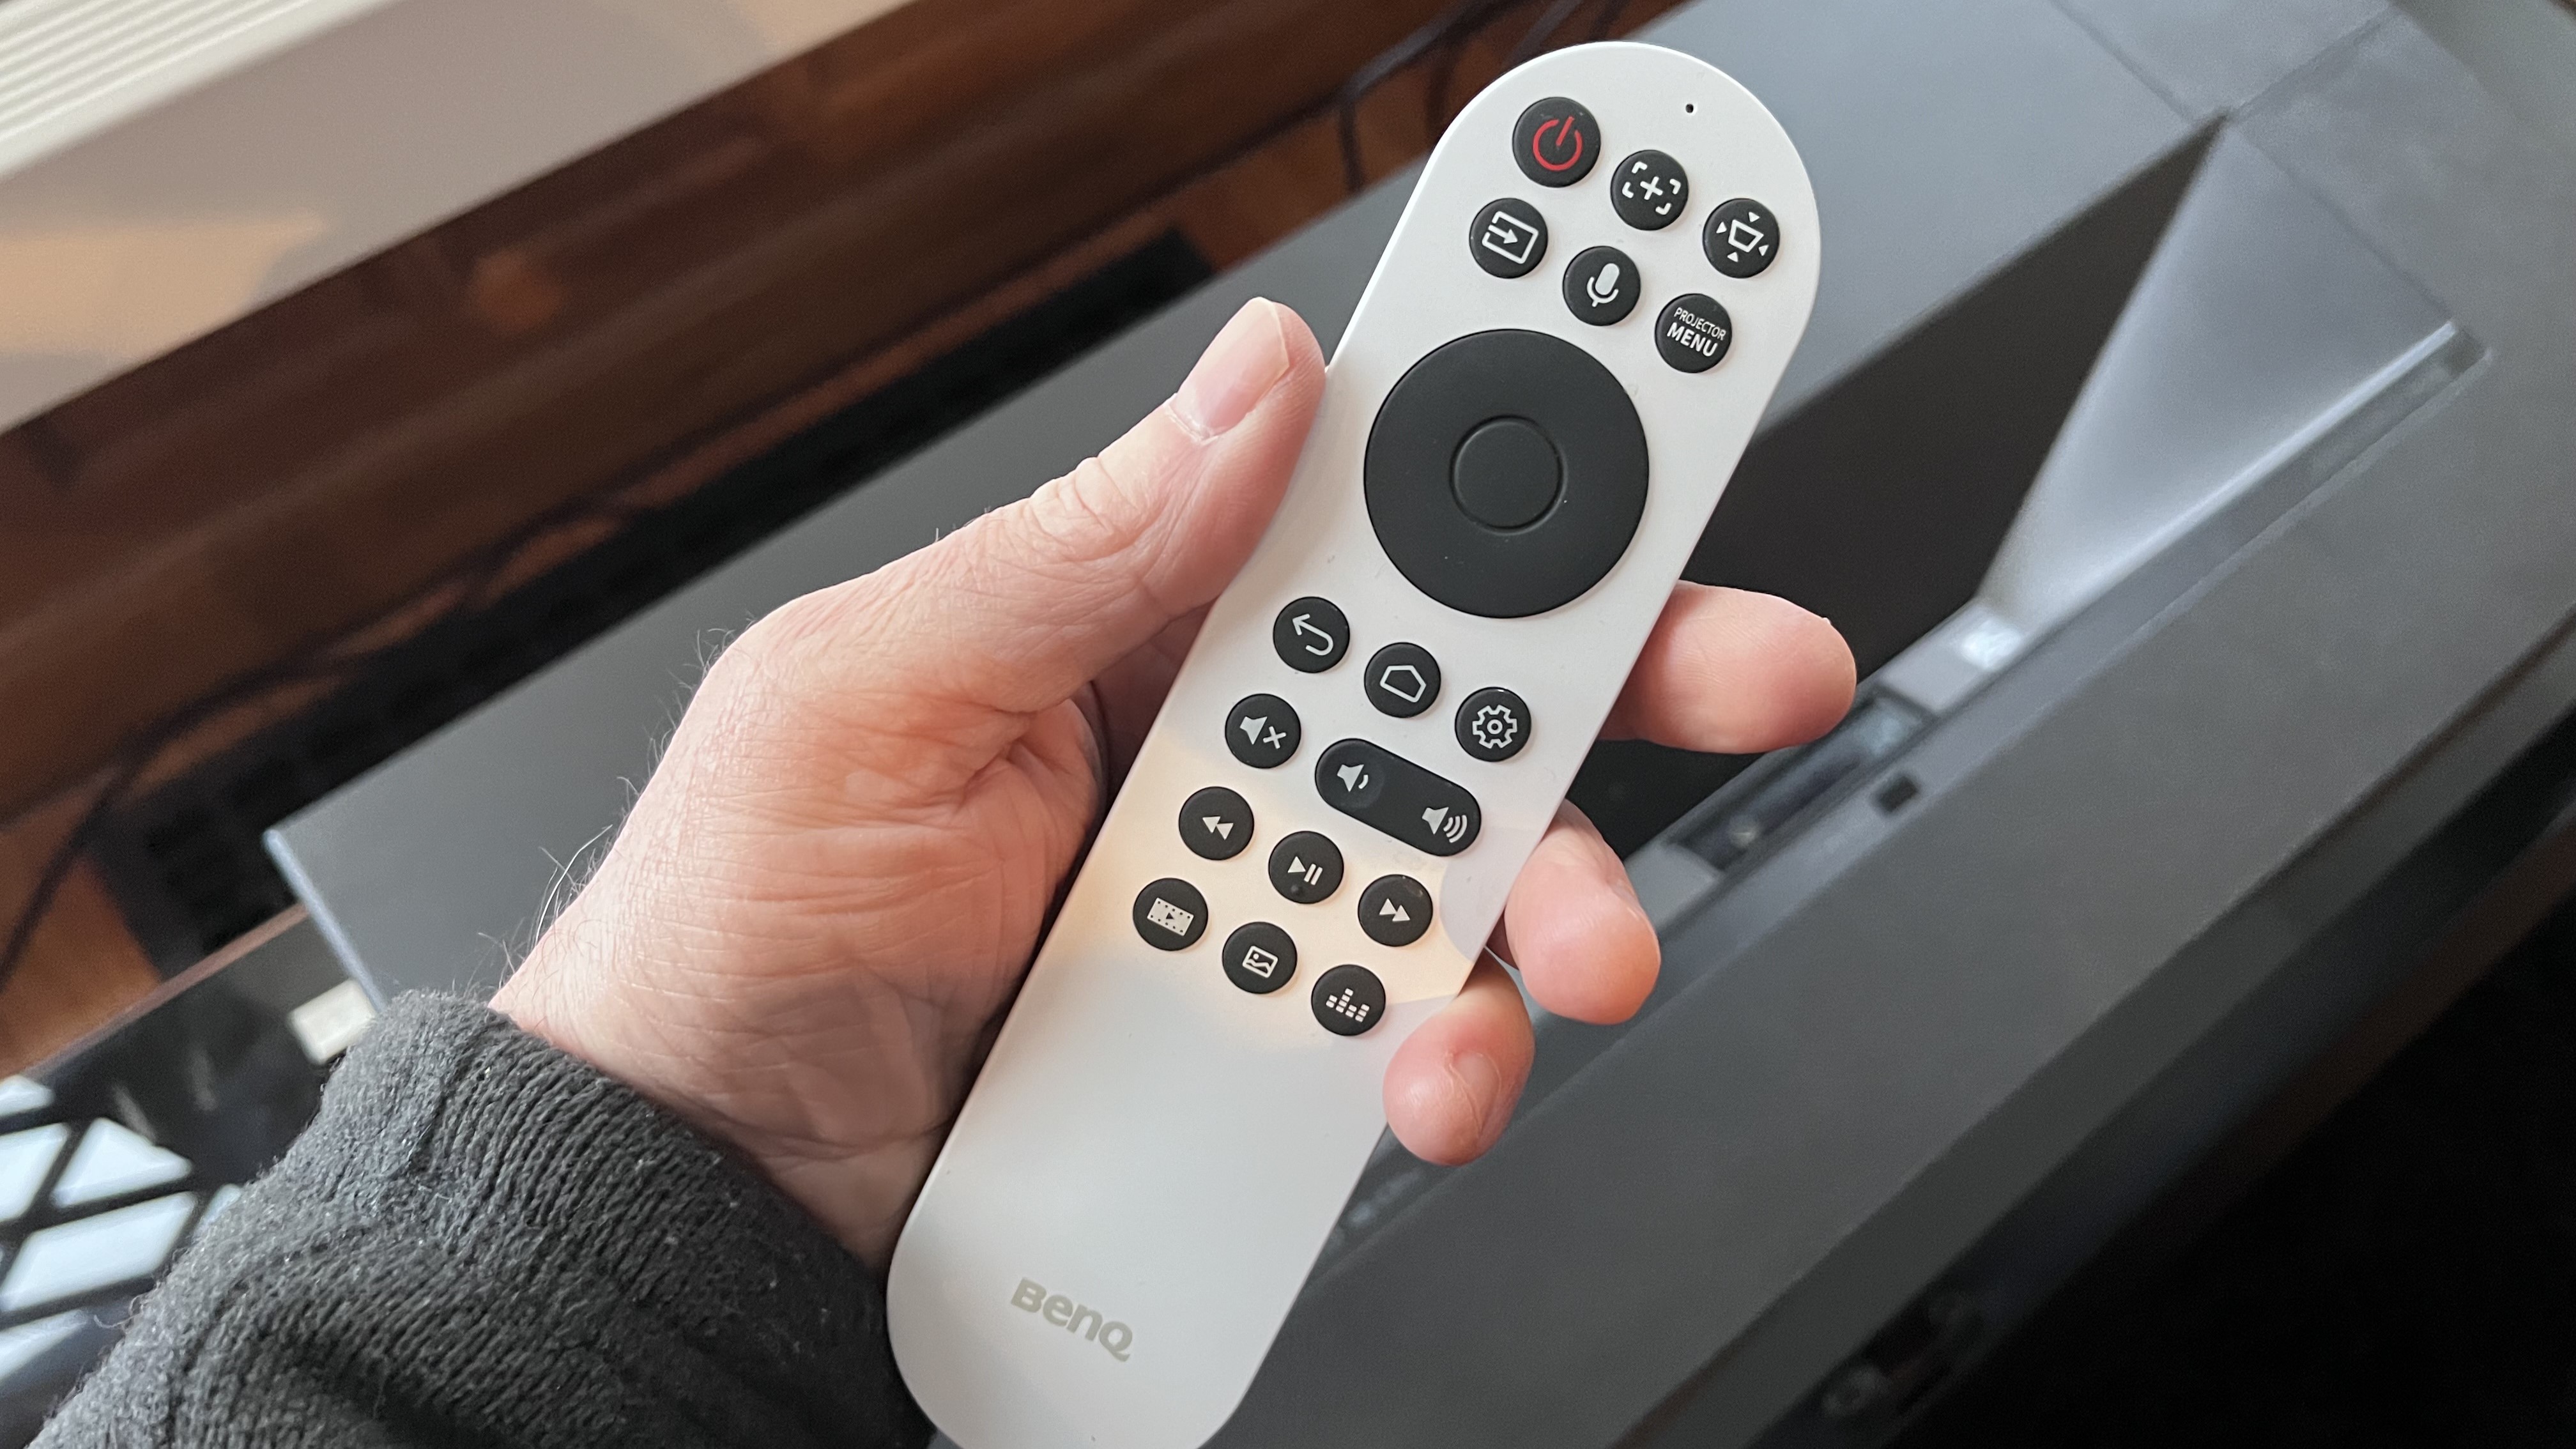 BenQ v5000i projector remote control in reviewer's hand